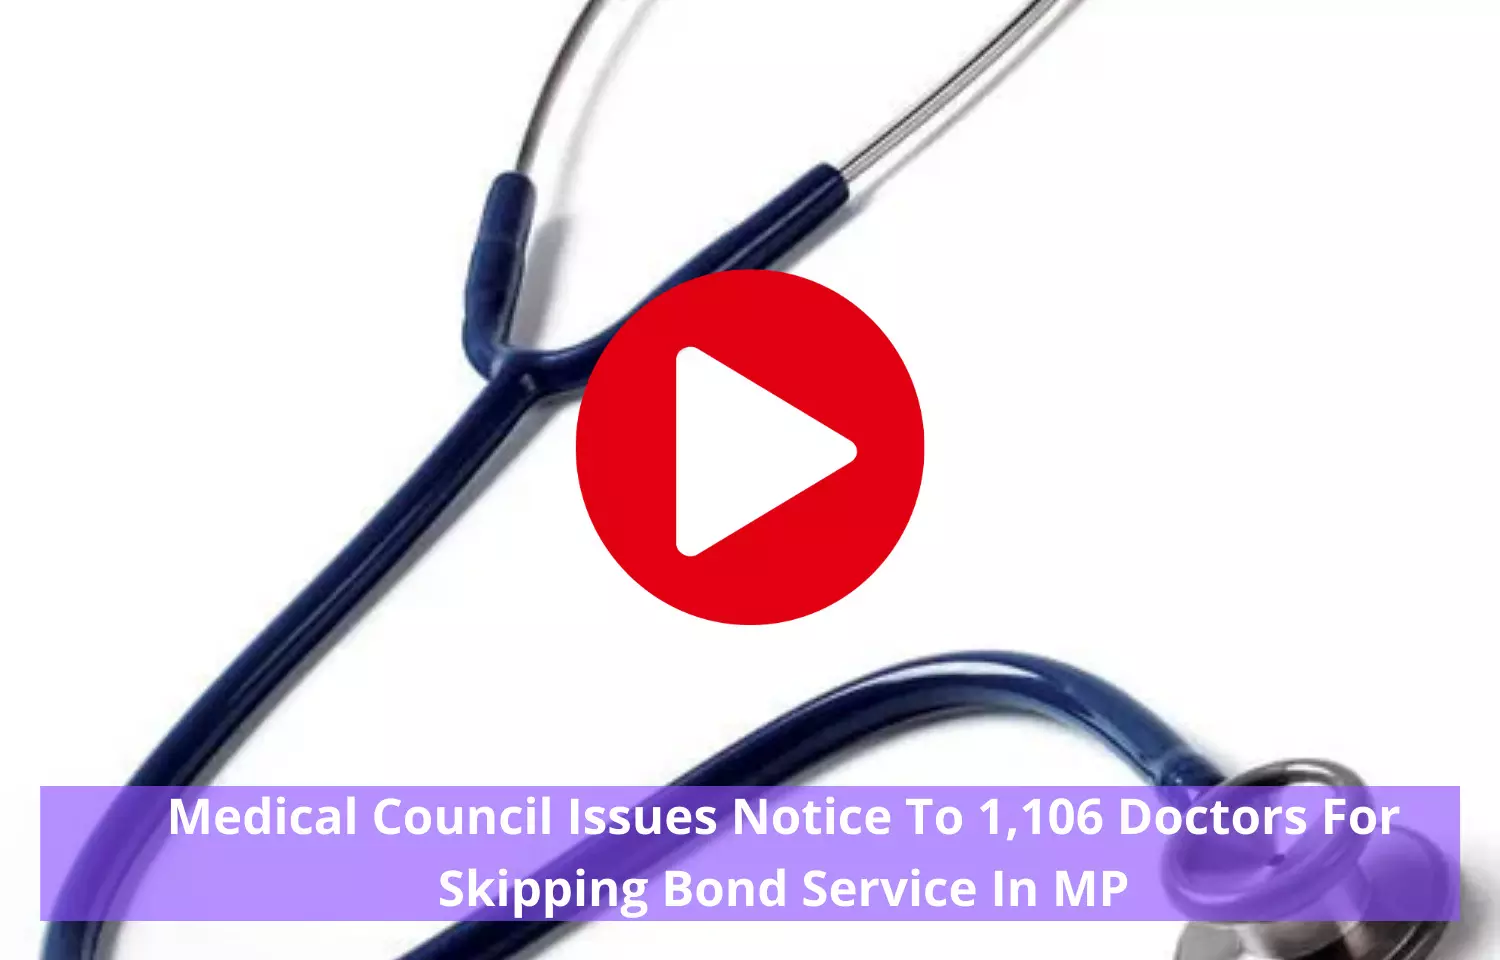 Medical Council Issues Notice To 1,106 Doctors For Skipping Bond Service In MP